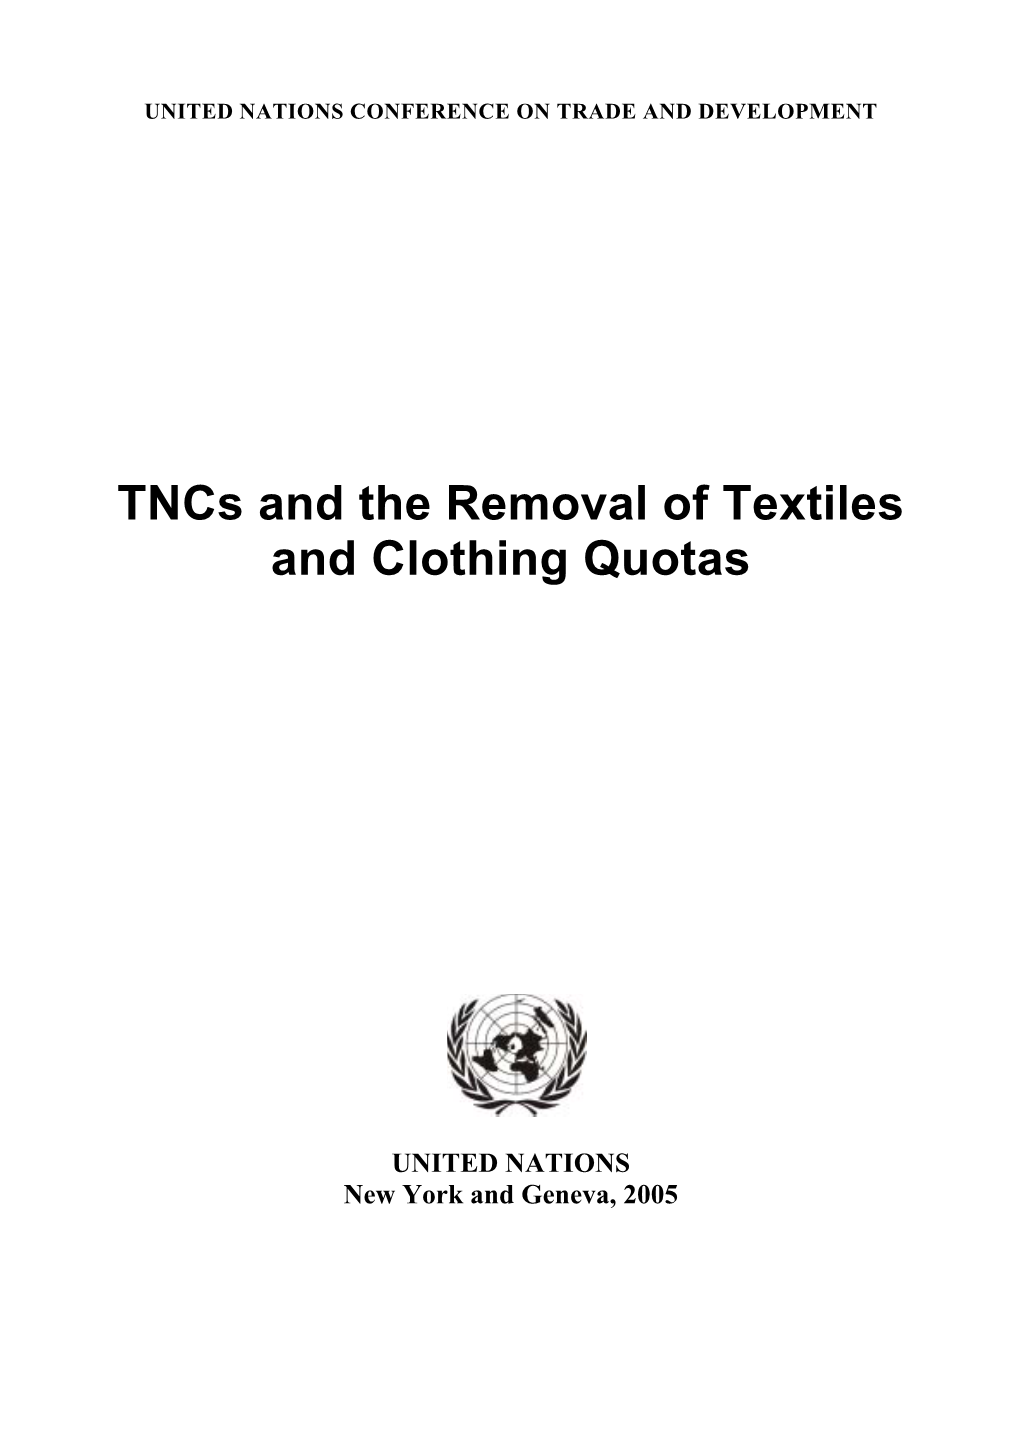 Tncs and the Removal of Textiles and Clothing Quotas